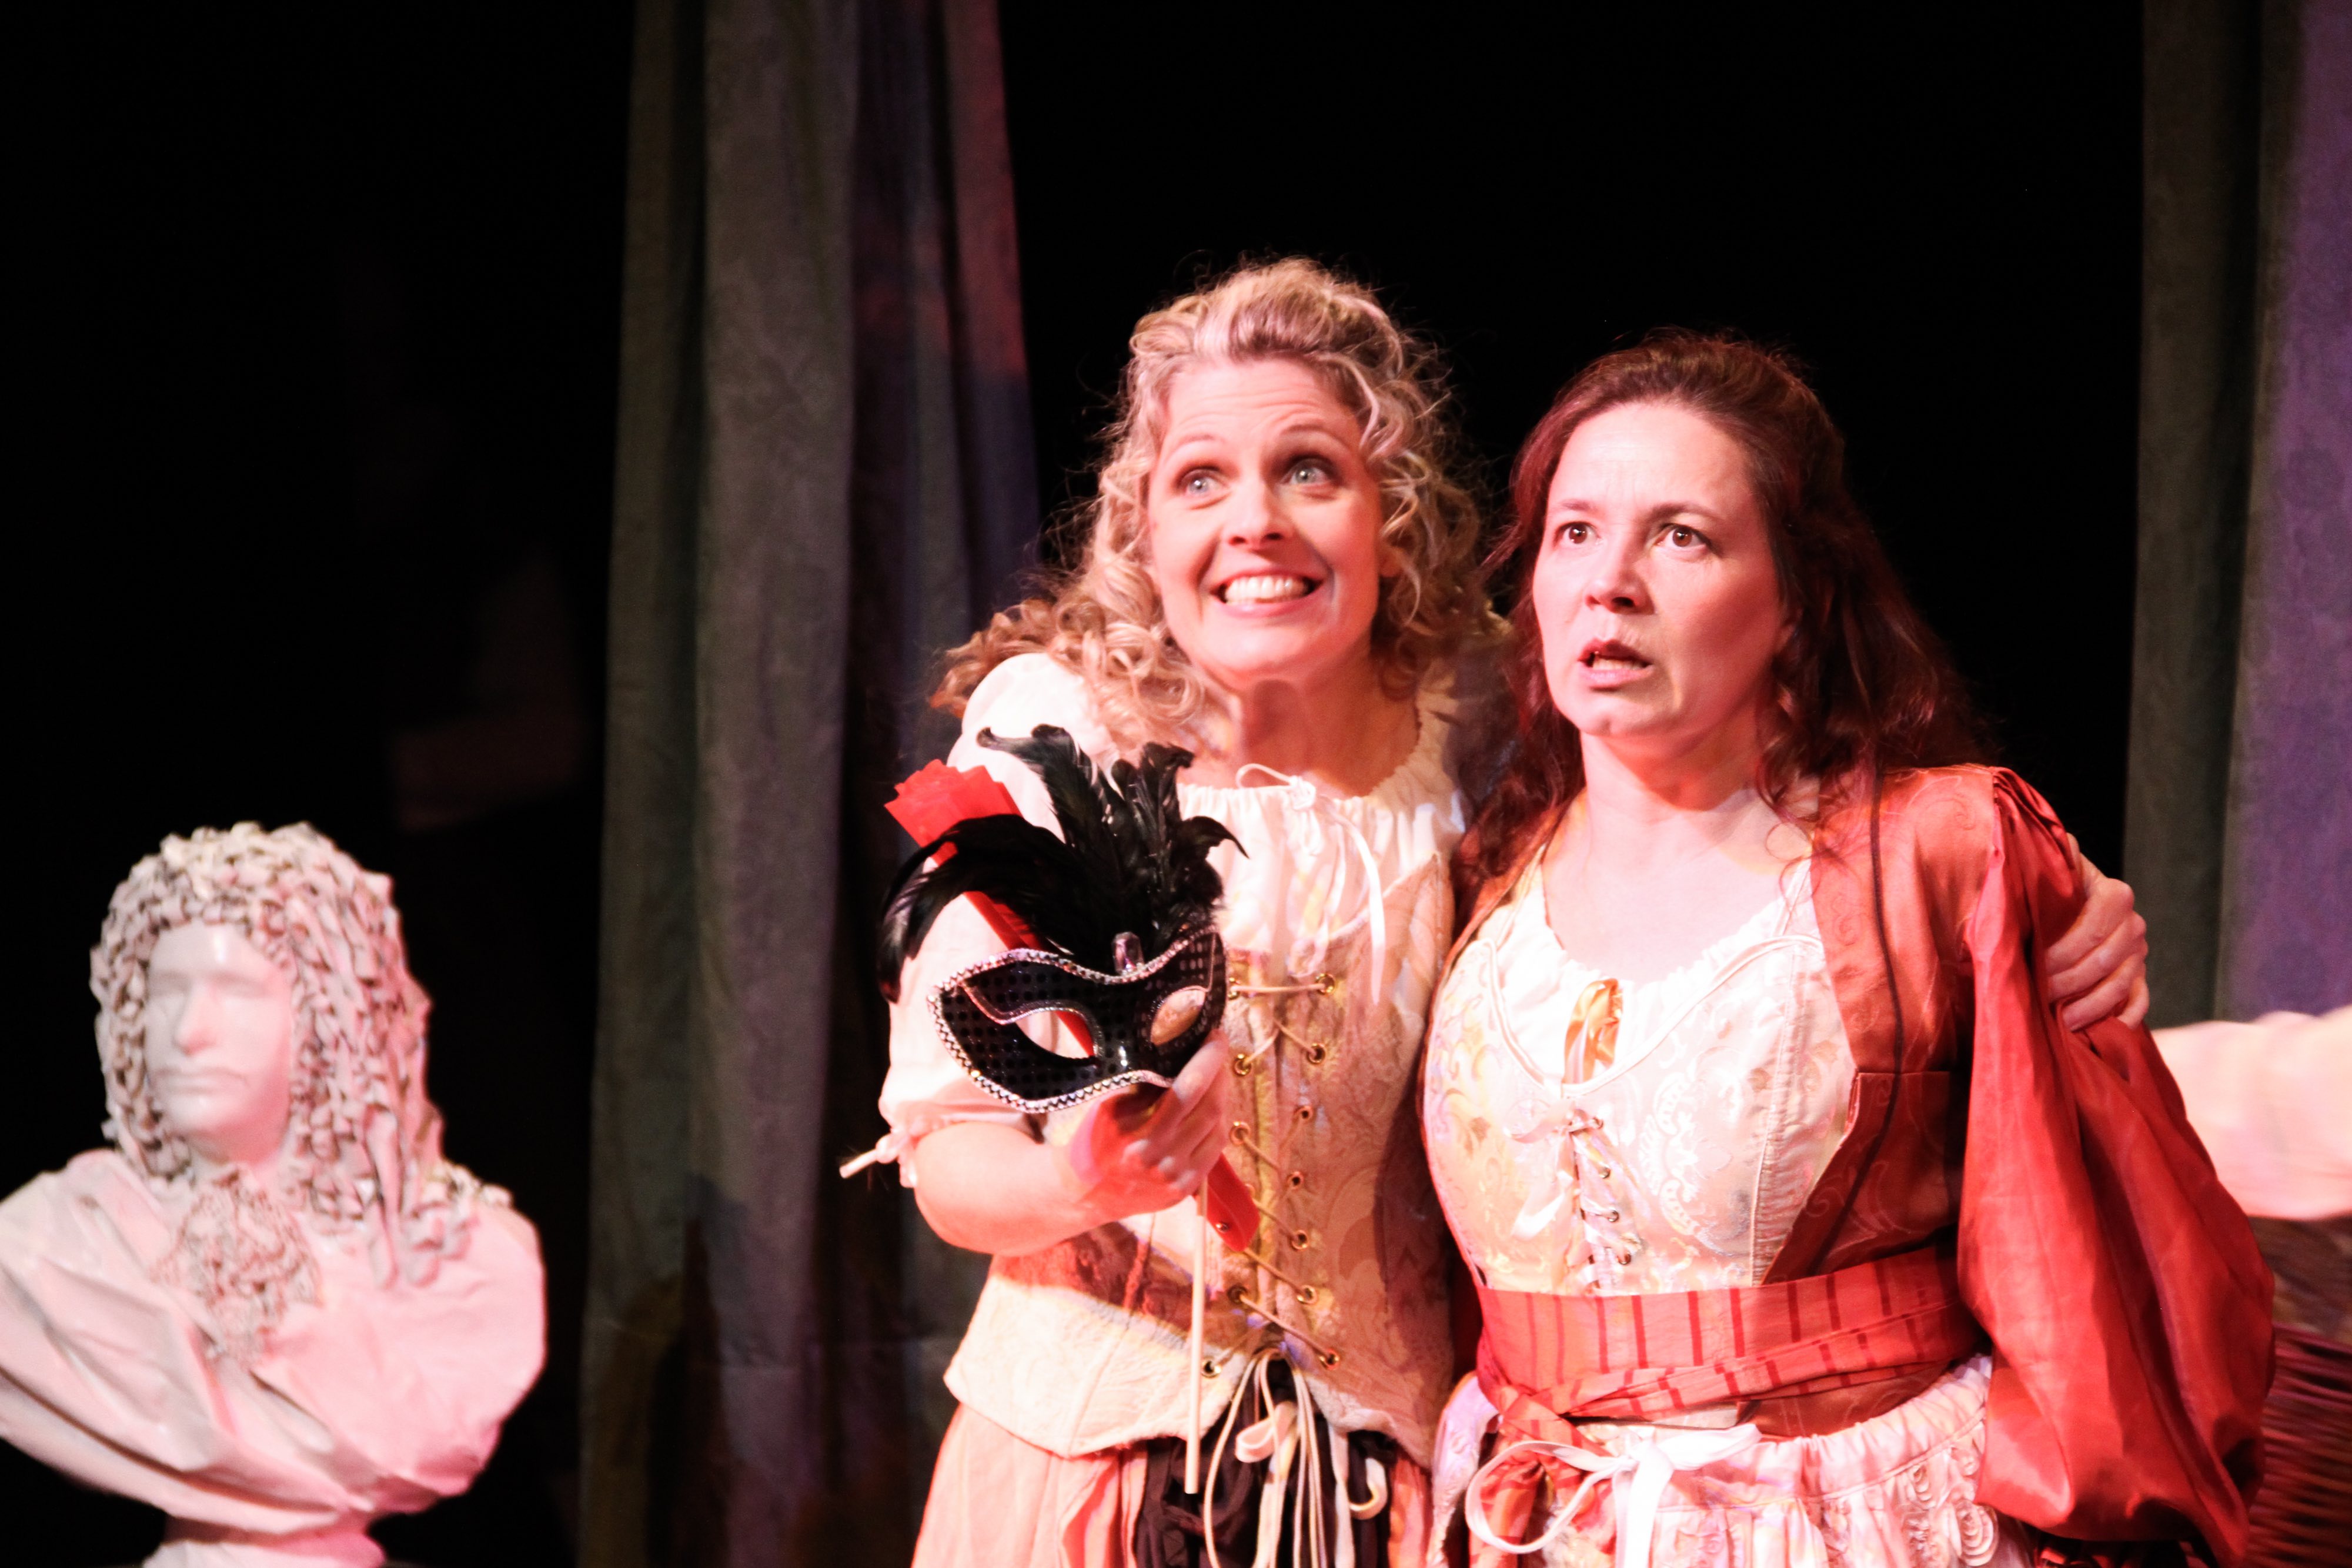 Photo of two actresses, Shawna Pasini on the left and Robin Guy on the right, during a show